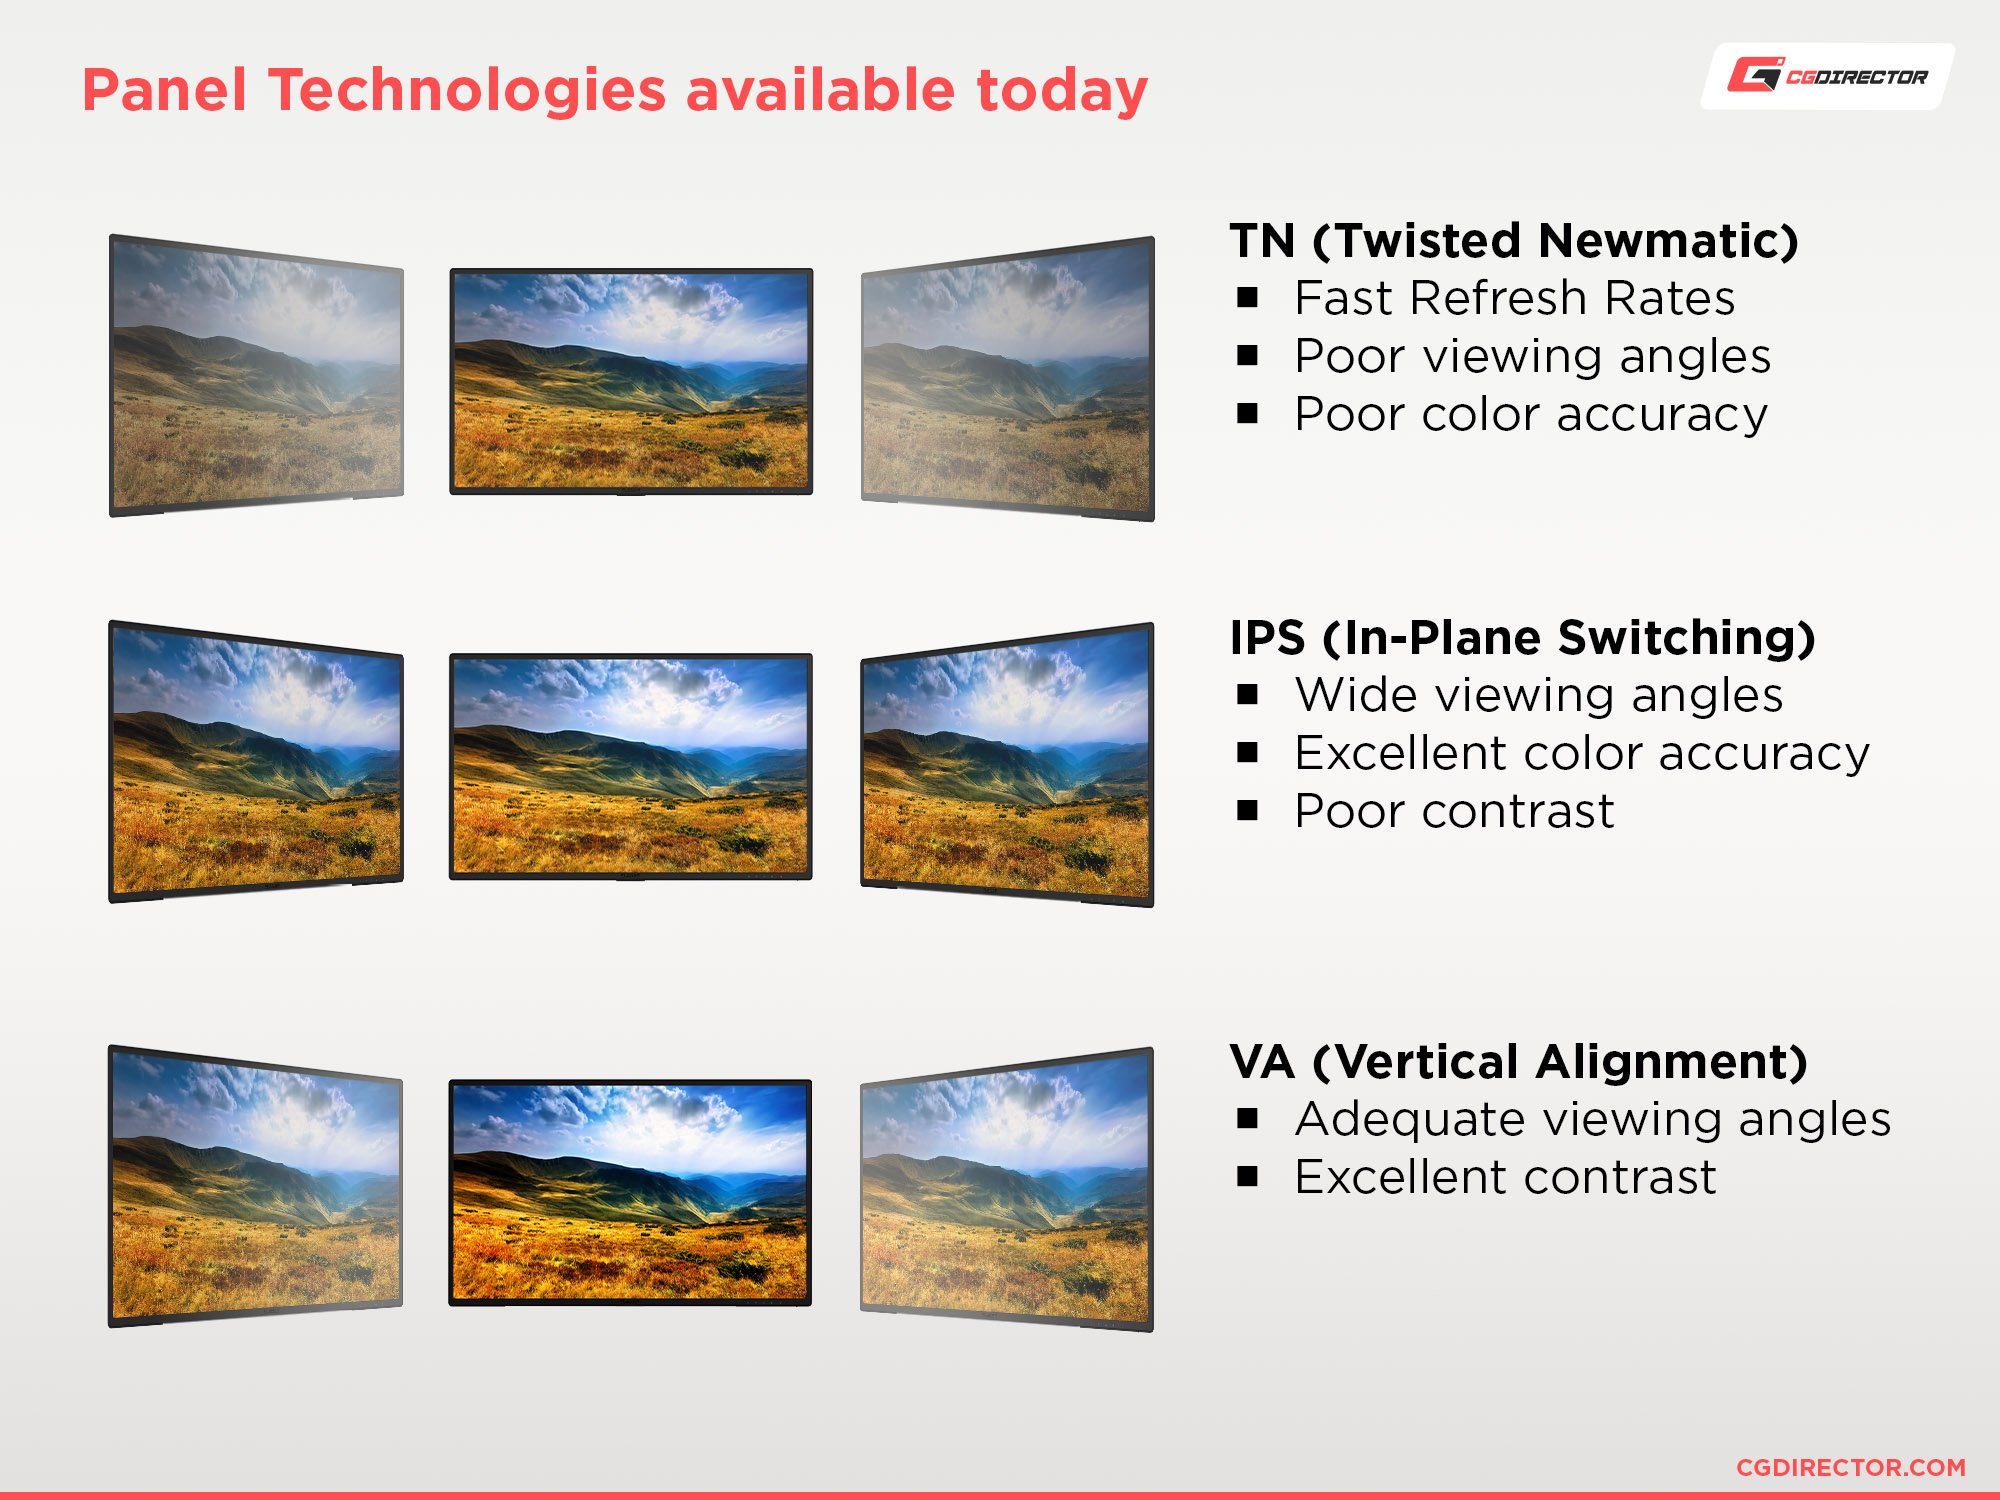 Panel technologies available today